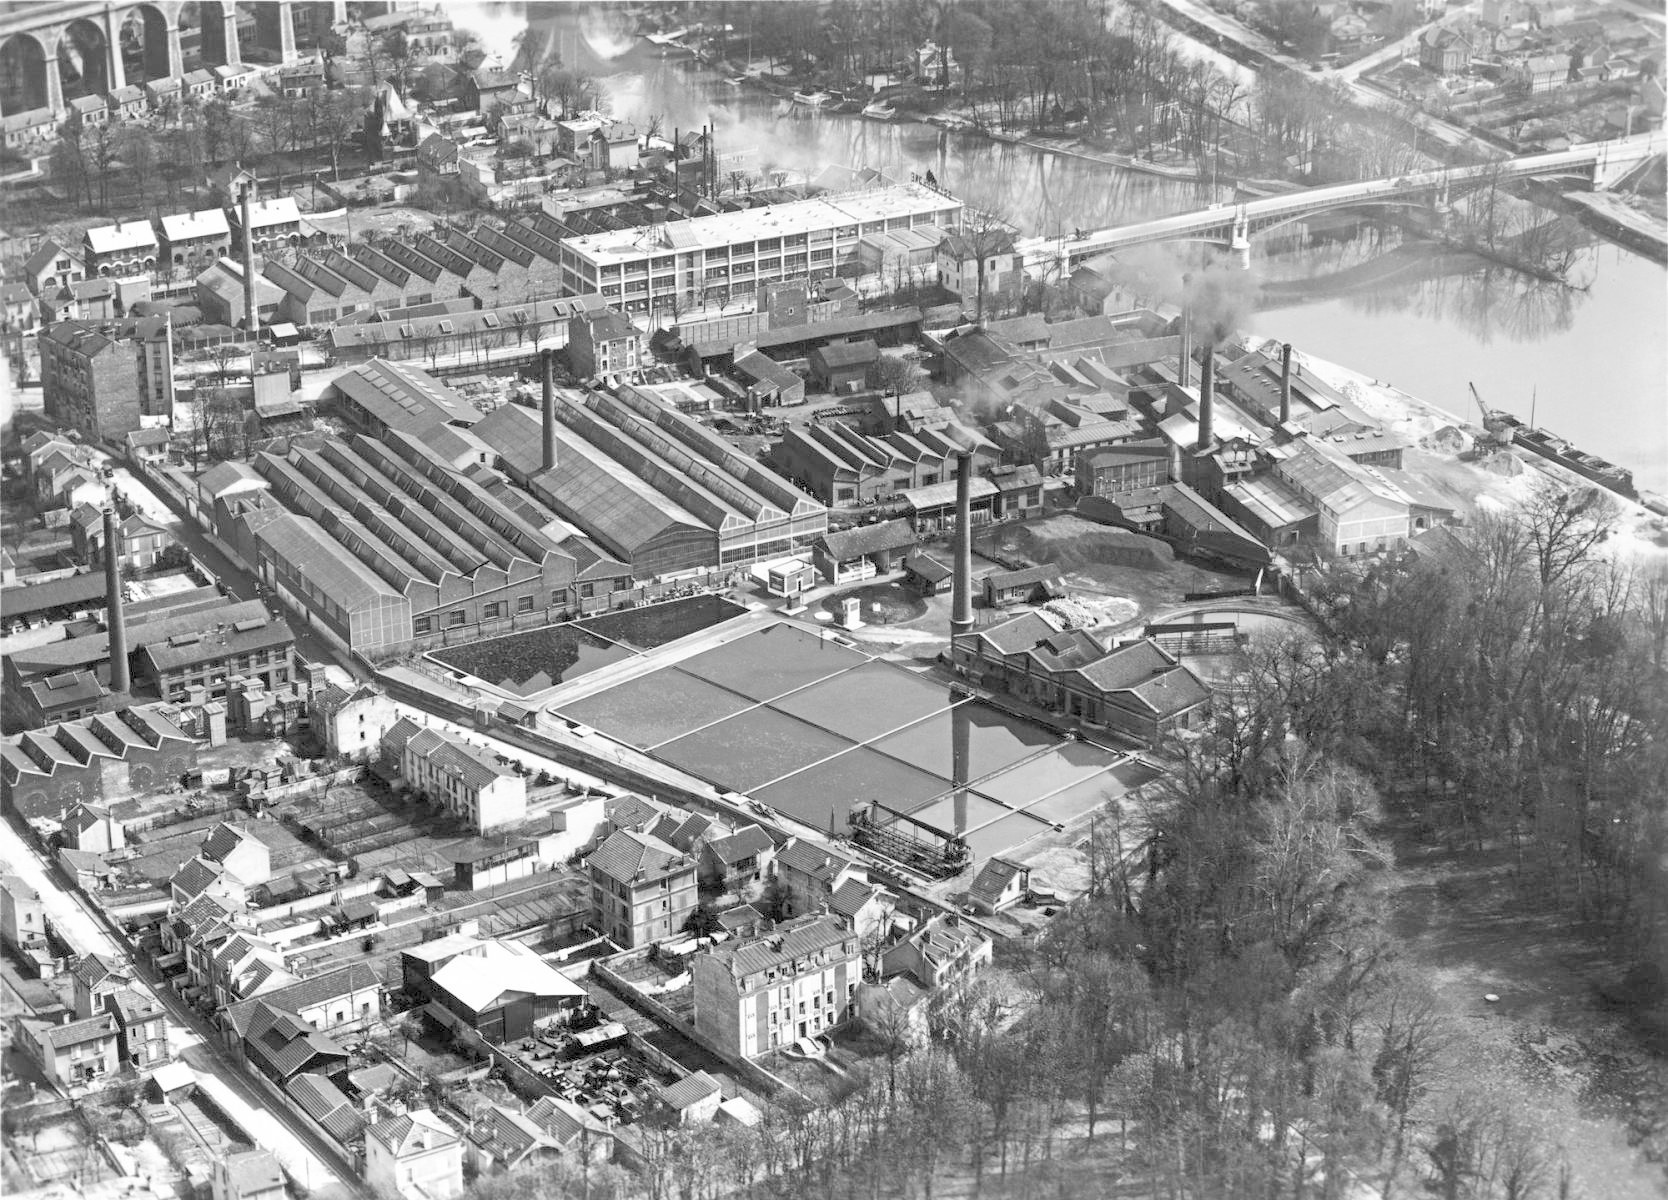 Black-and-white aerial photograph of low-slung industrial buildings with some tall, thin chimneys beside a river.